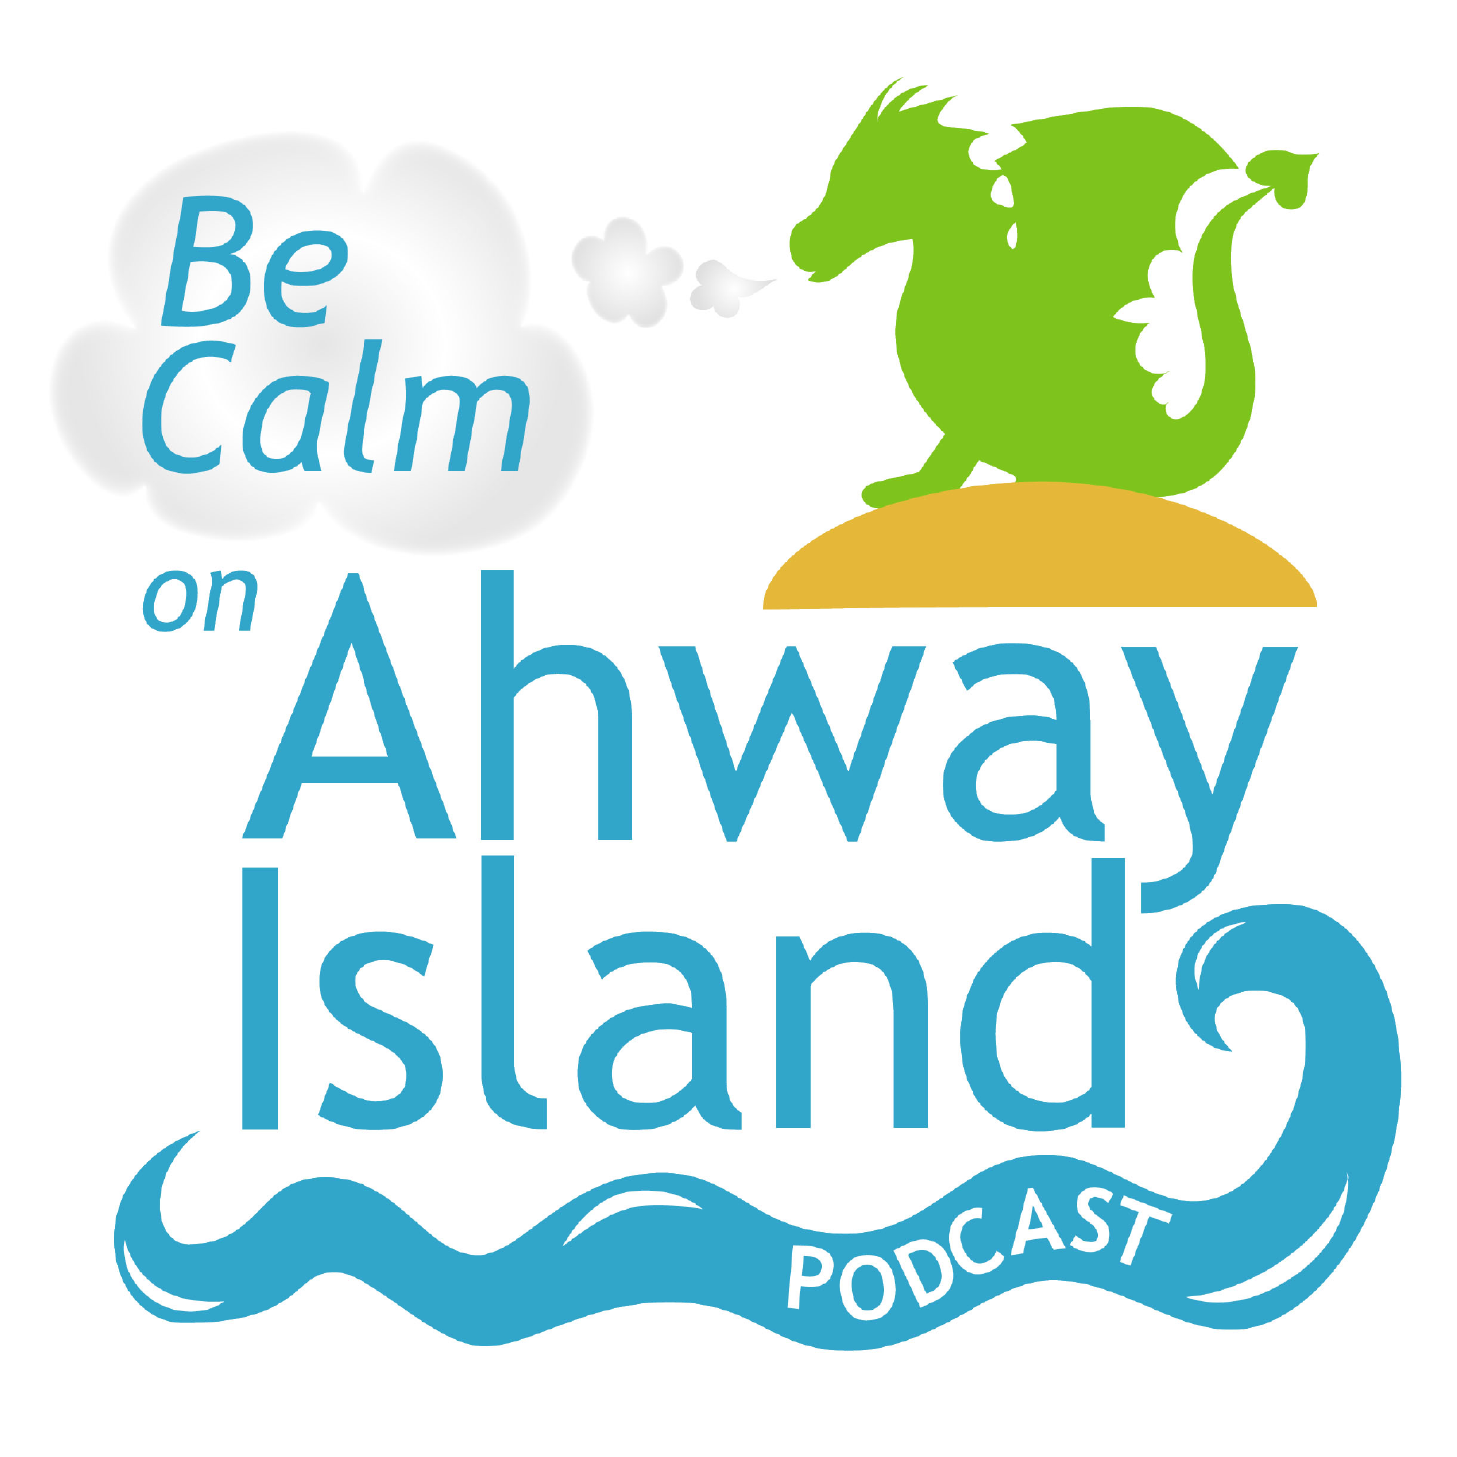 Be Calm on Ahway Island Bedtime Stories podcast